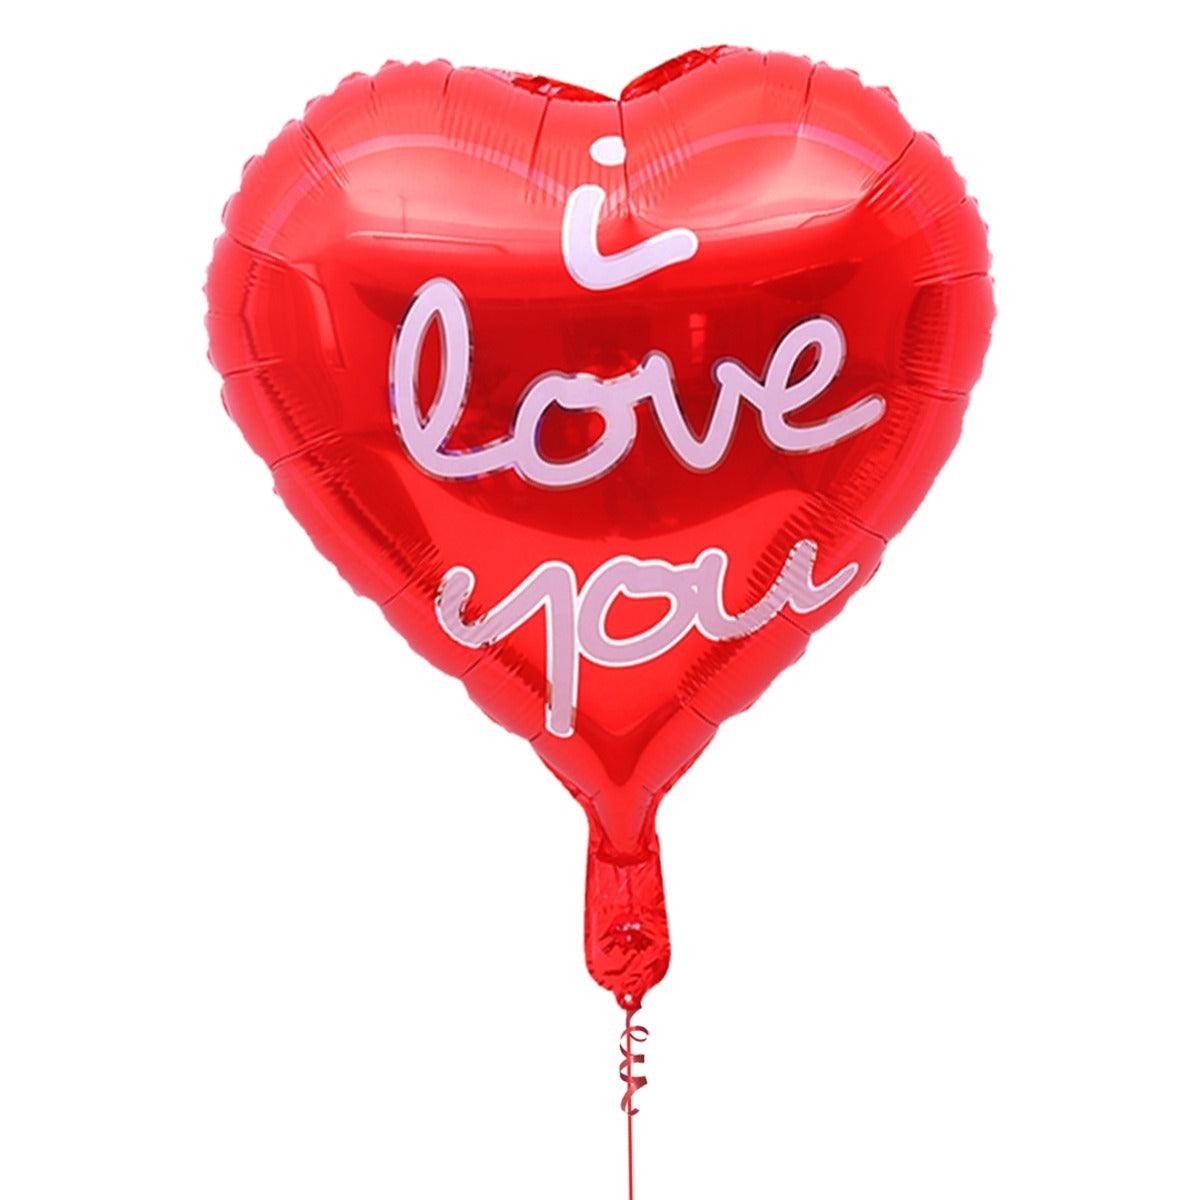 PartyCorp I Love You Forever Heart Shaped Foil Balloon Bouquet, Decoration Set, DIY Pack of 5